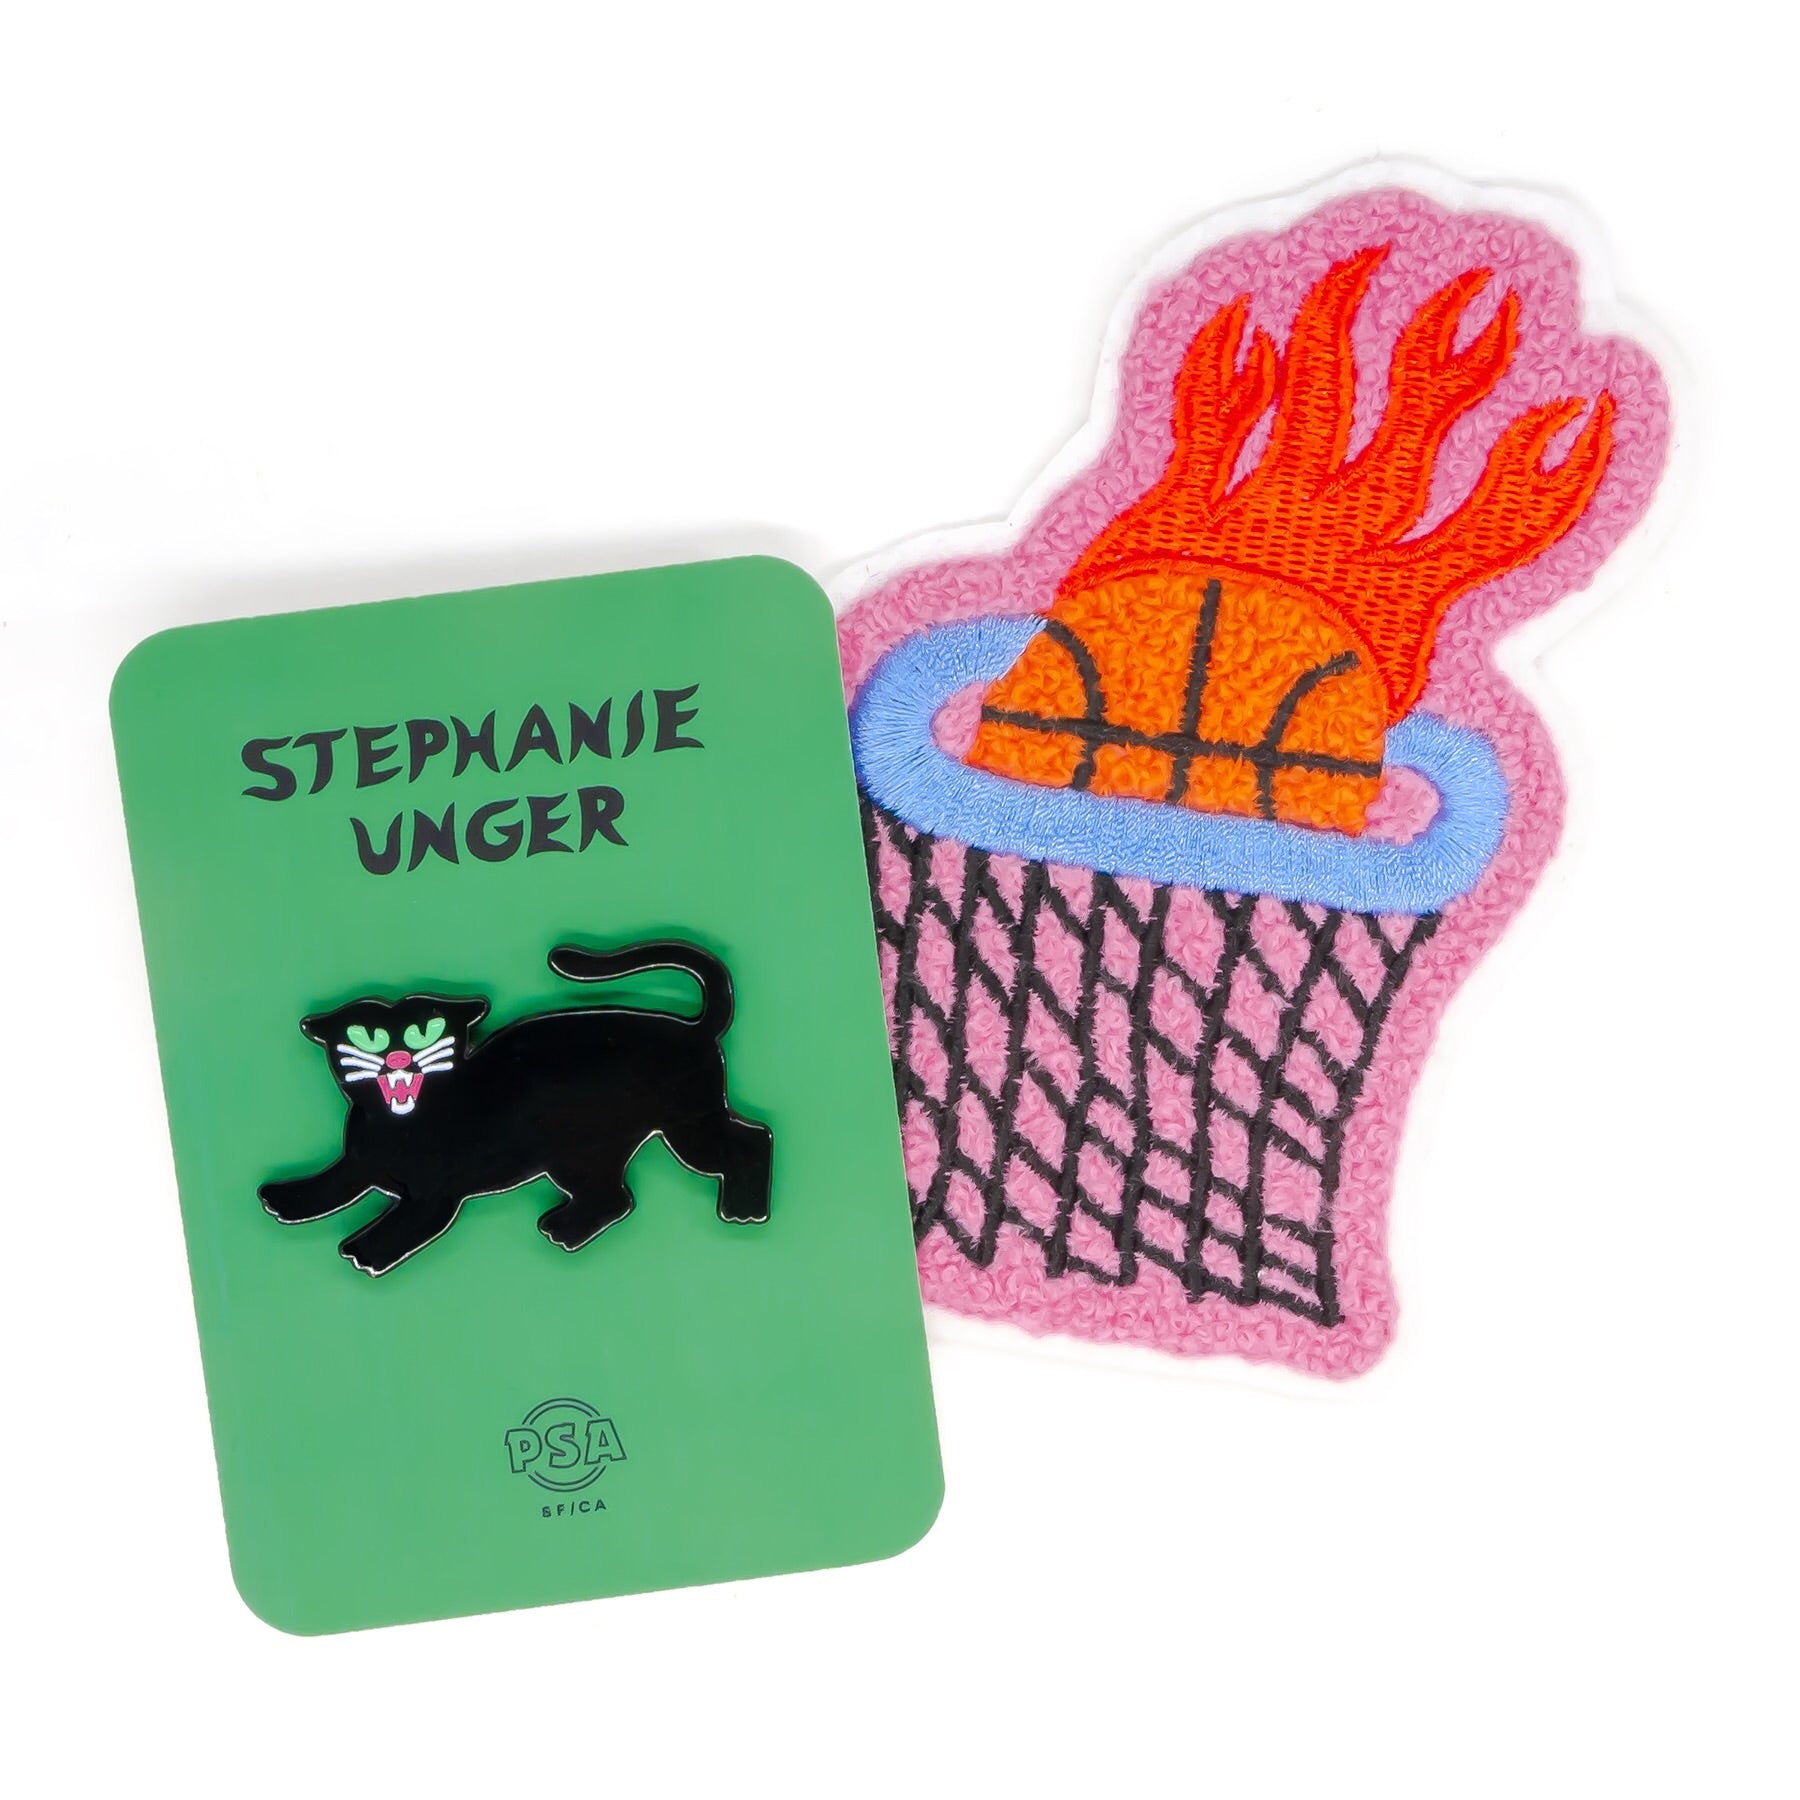 Stephanie Unger pin and patch set